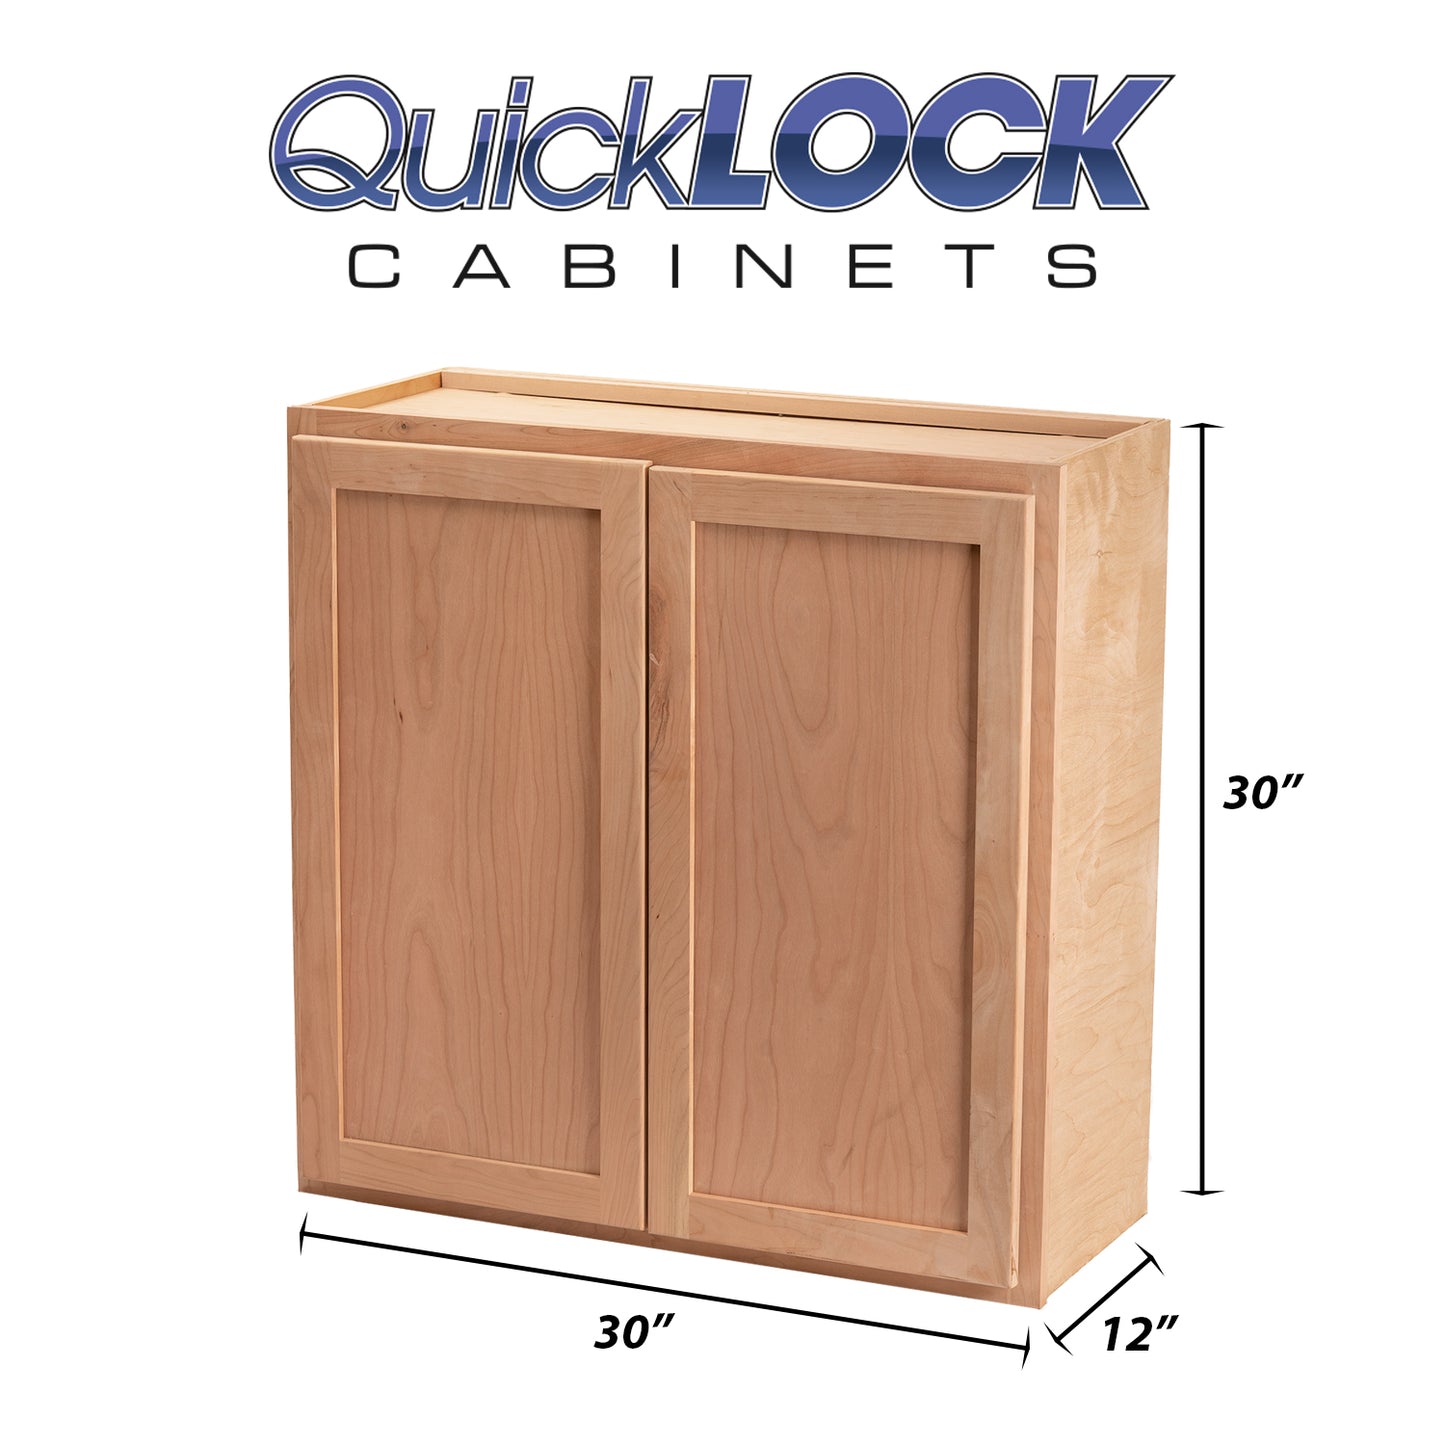 Quicklock RTA (Ready-to-Assemble) Raw Cherry Wall Cabinet- 30", 33", 36" W x 30" H